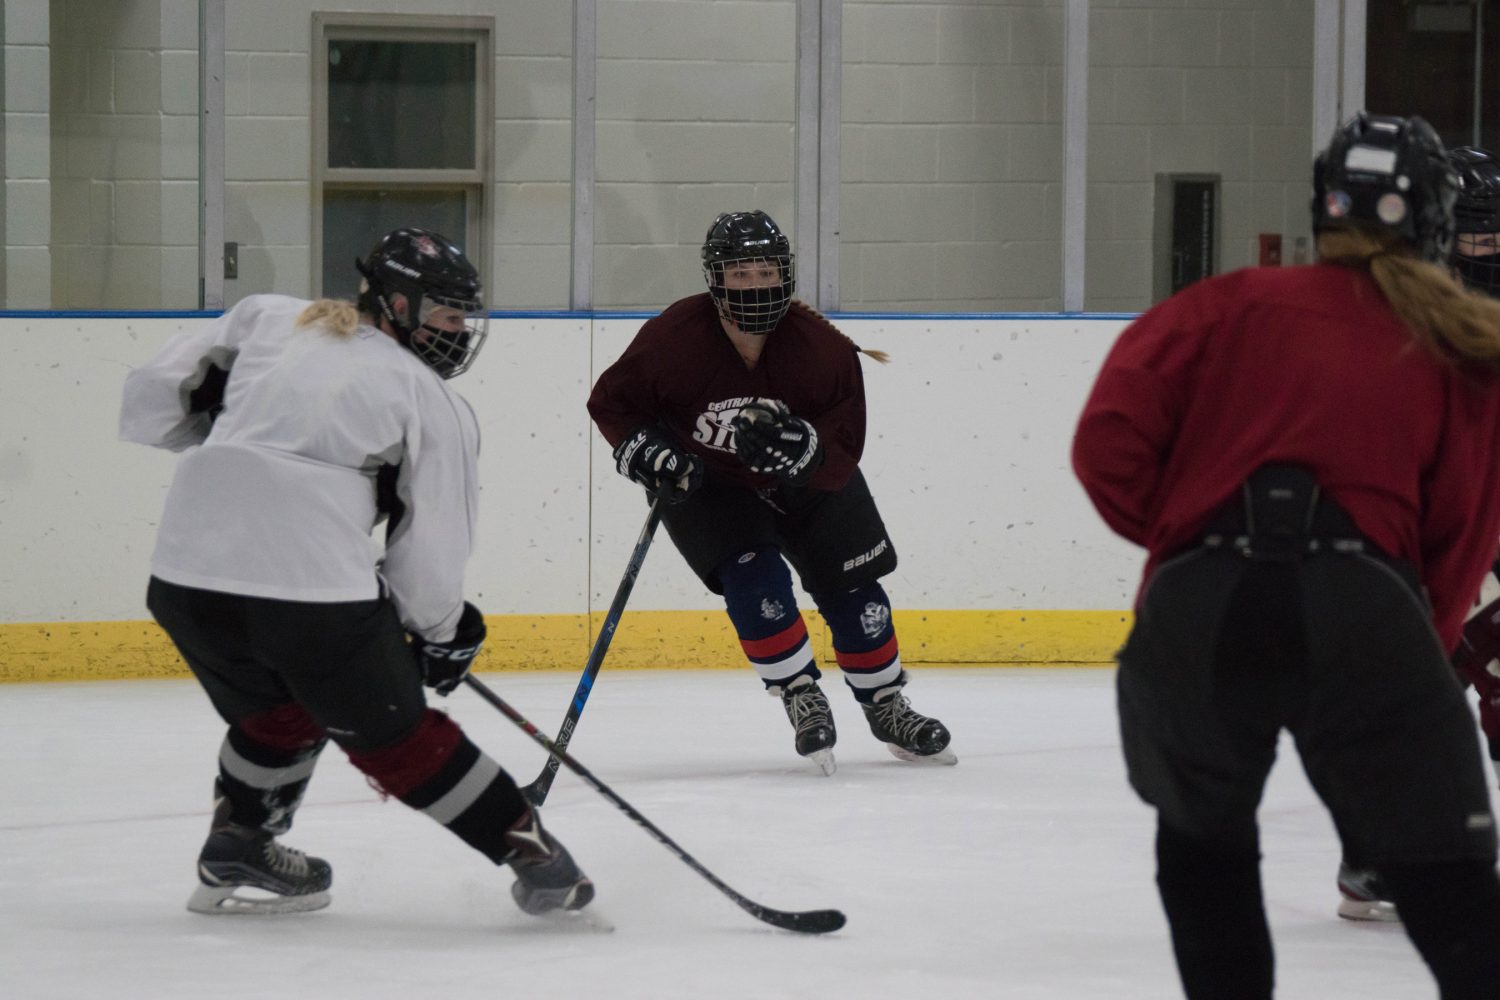 MHS Senior Audrey Ladewig sets goals and makes goals … on and off the ice